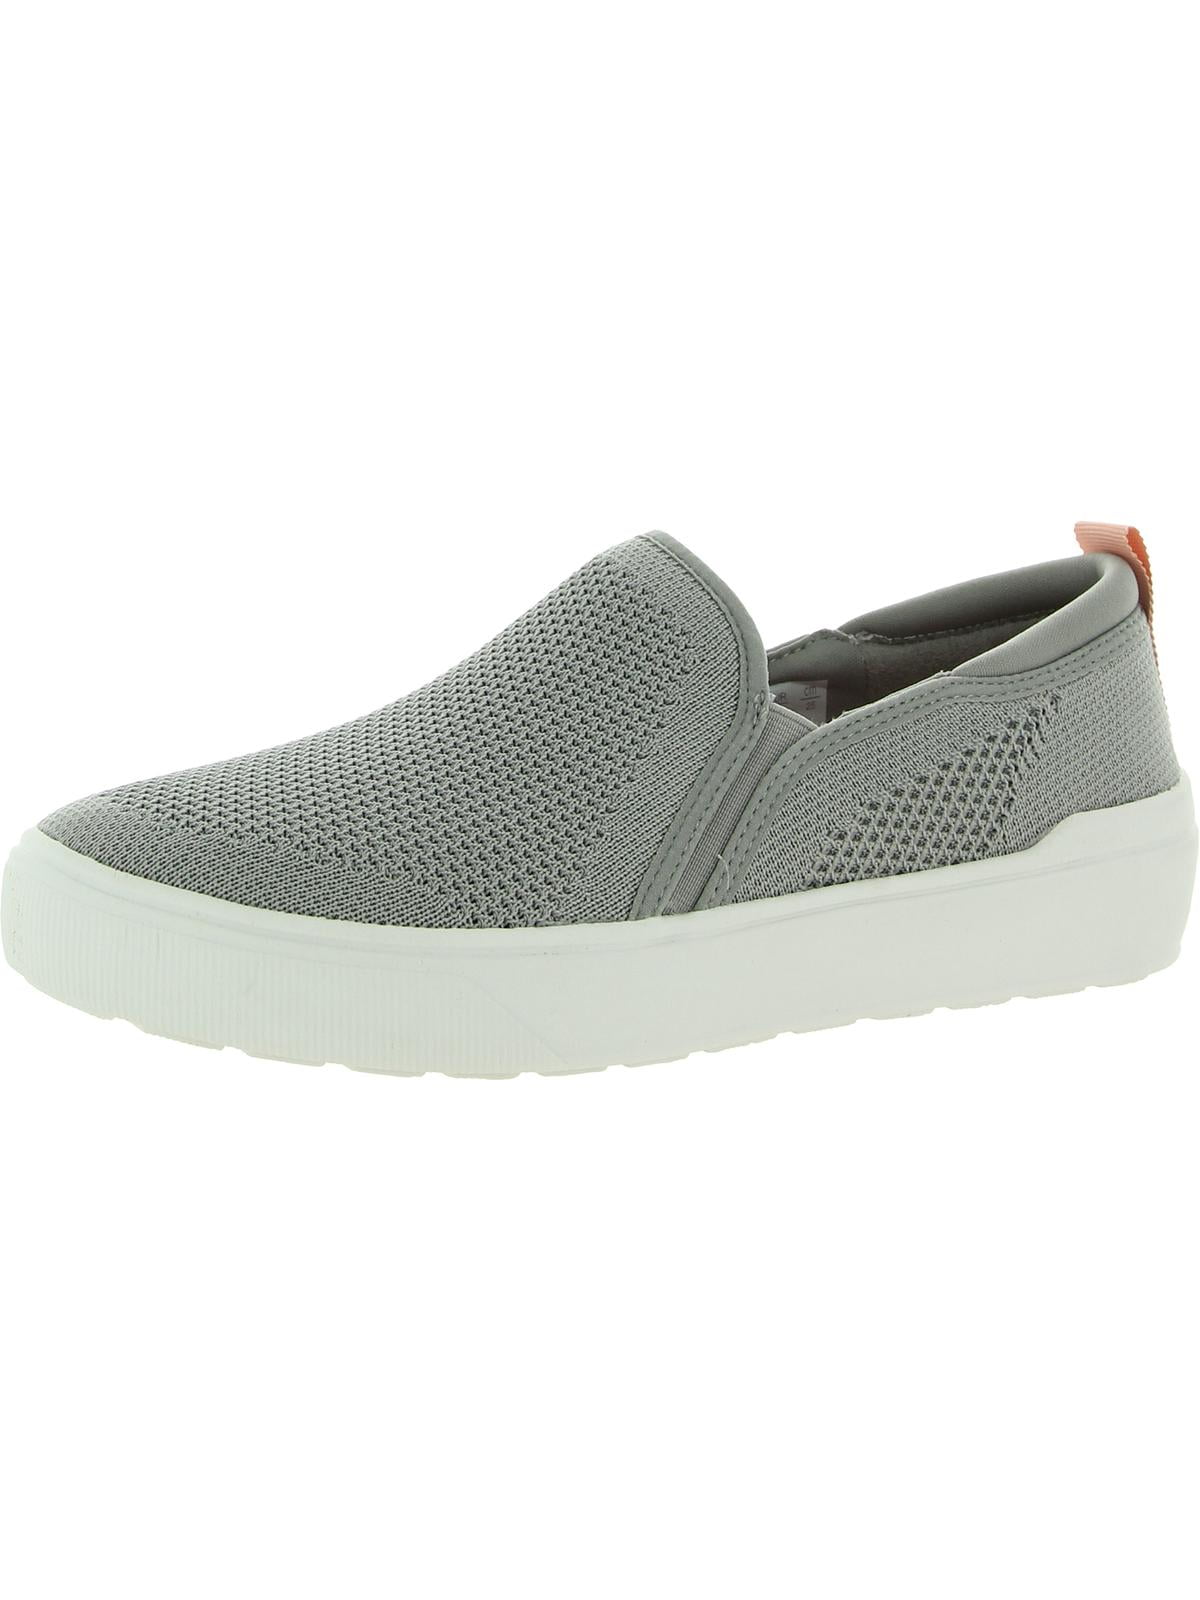 Dr. Scholl's Womens Delight Knit Slip On Casual and Fashion Sneakers ...